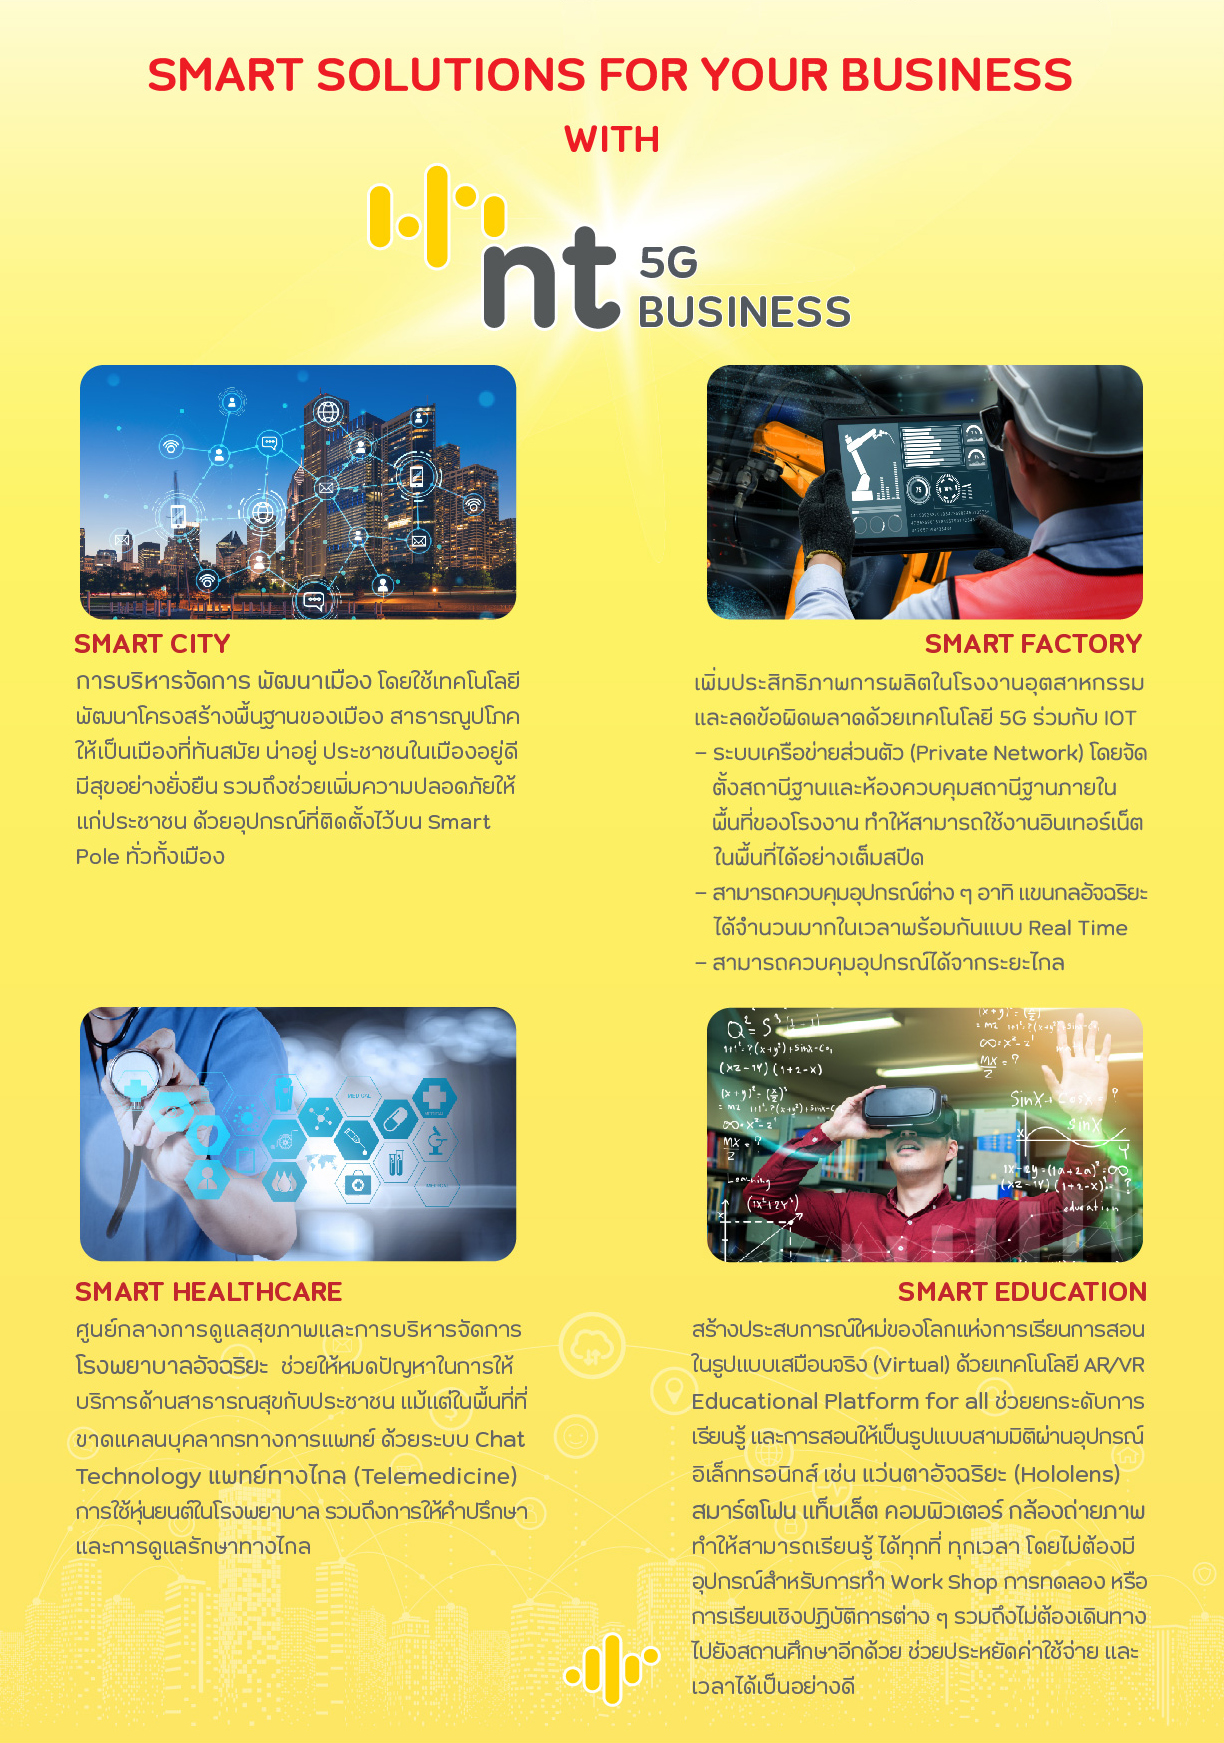 Smart Solution for Your Business with NT 5G Business